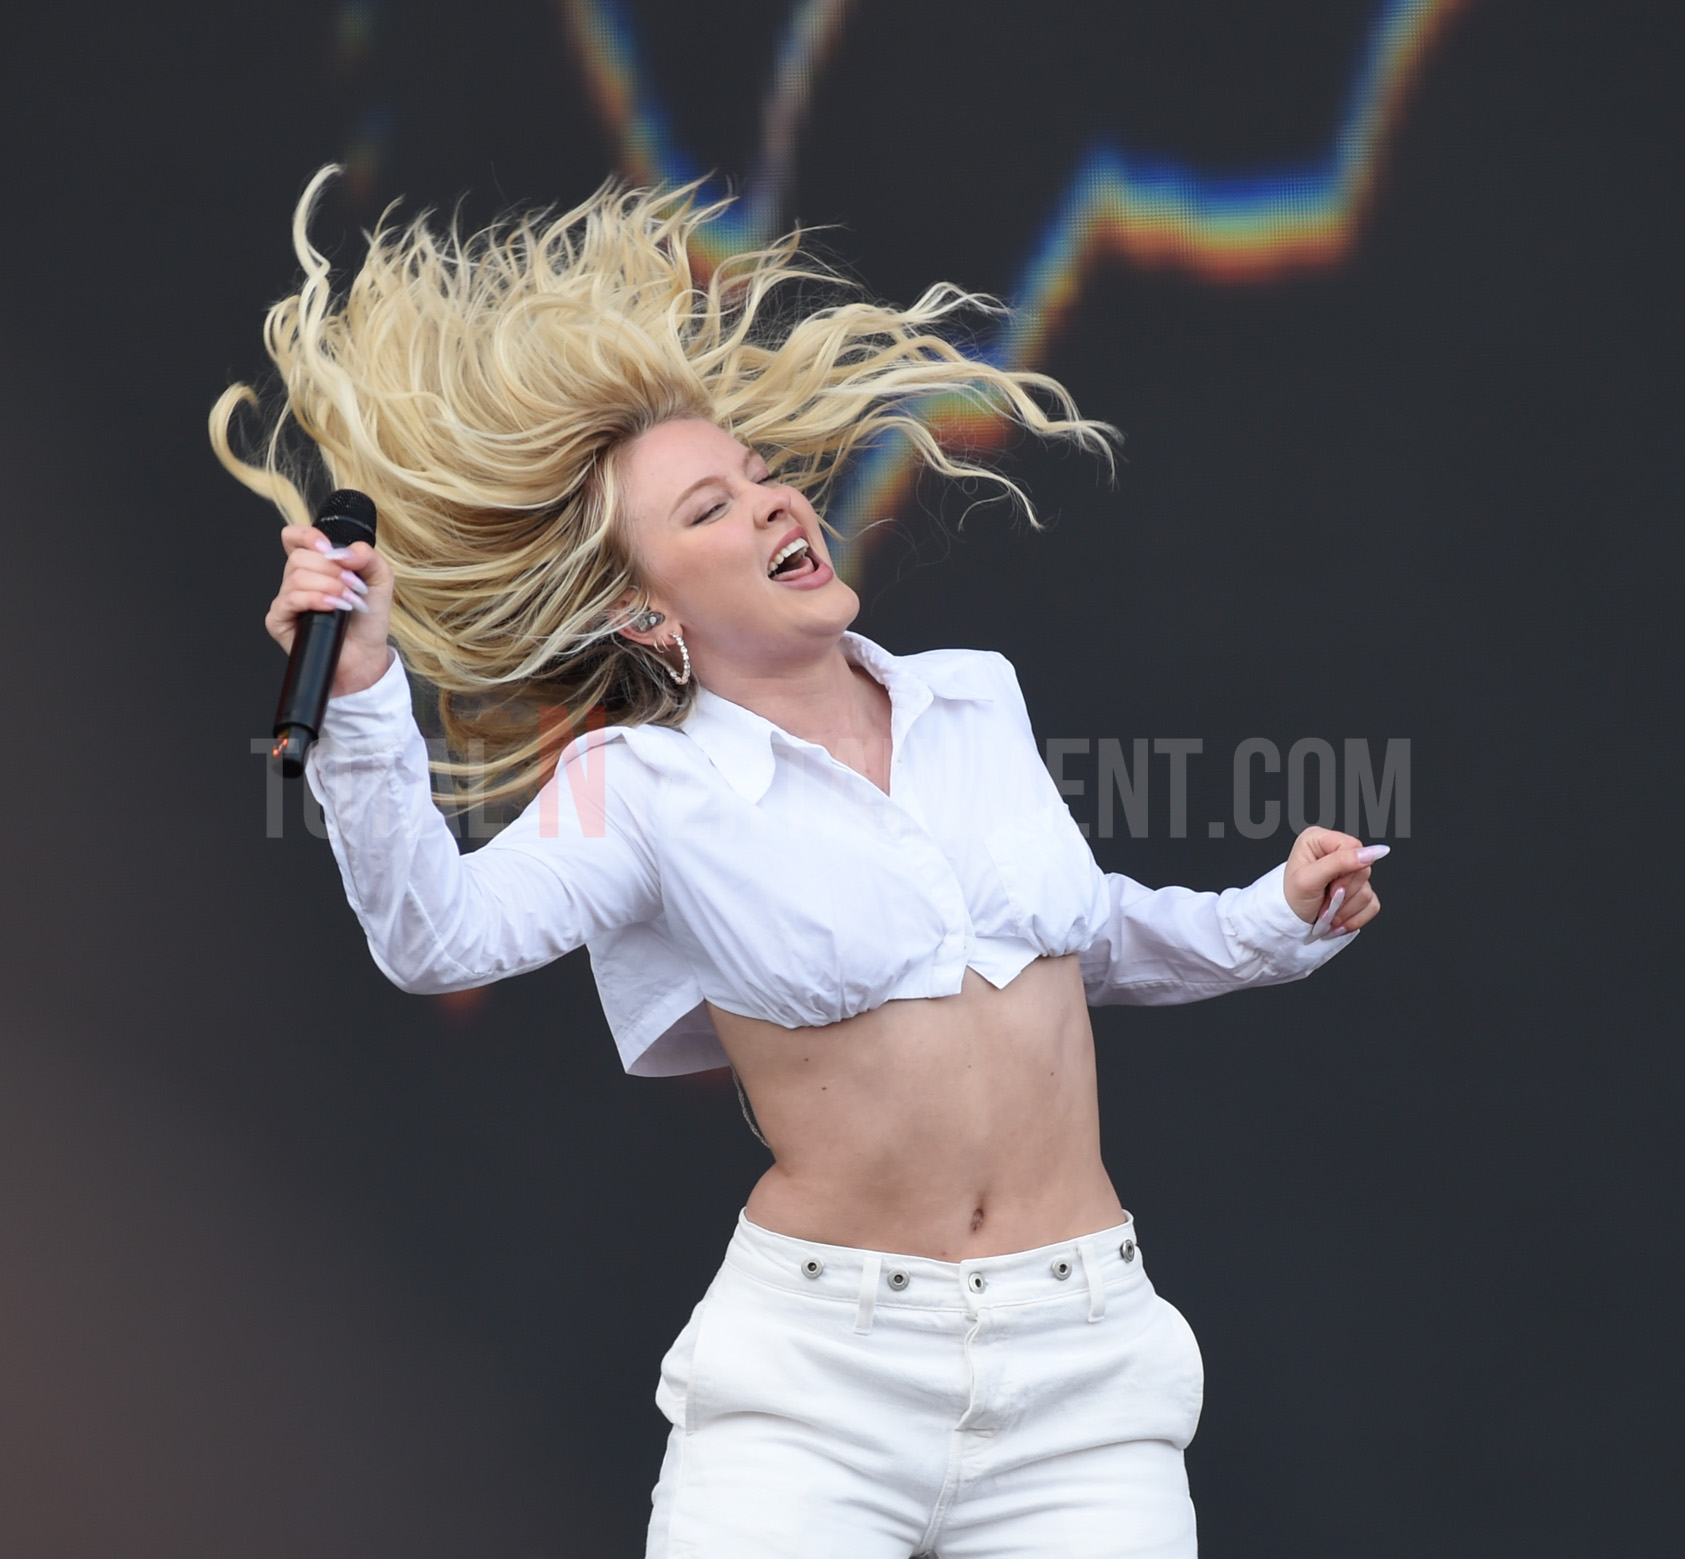 Live Event, Music, Stephen Farrell, Totalntertainment, Radio 1 Big weekend, Music Photography